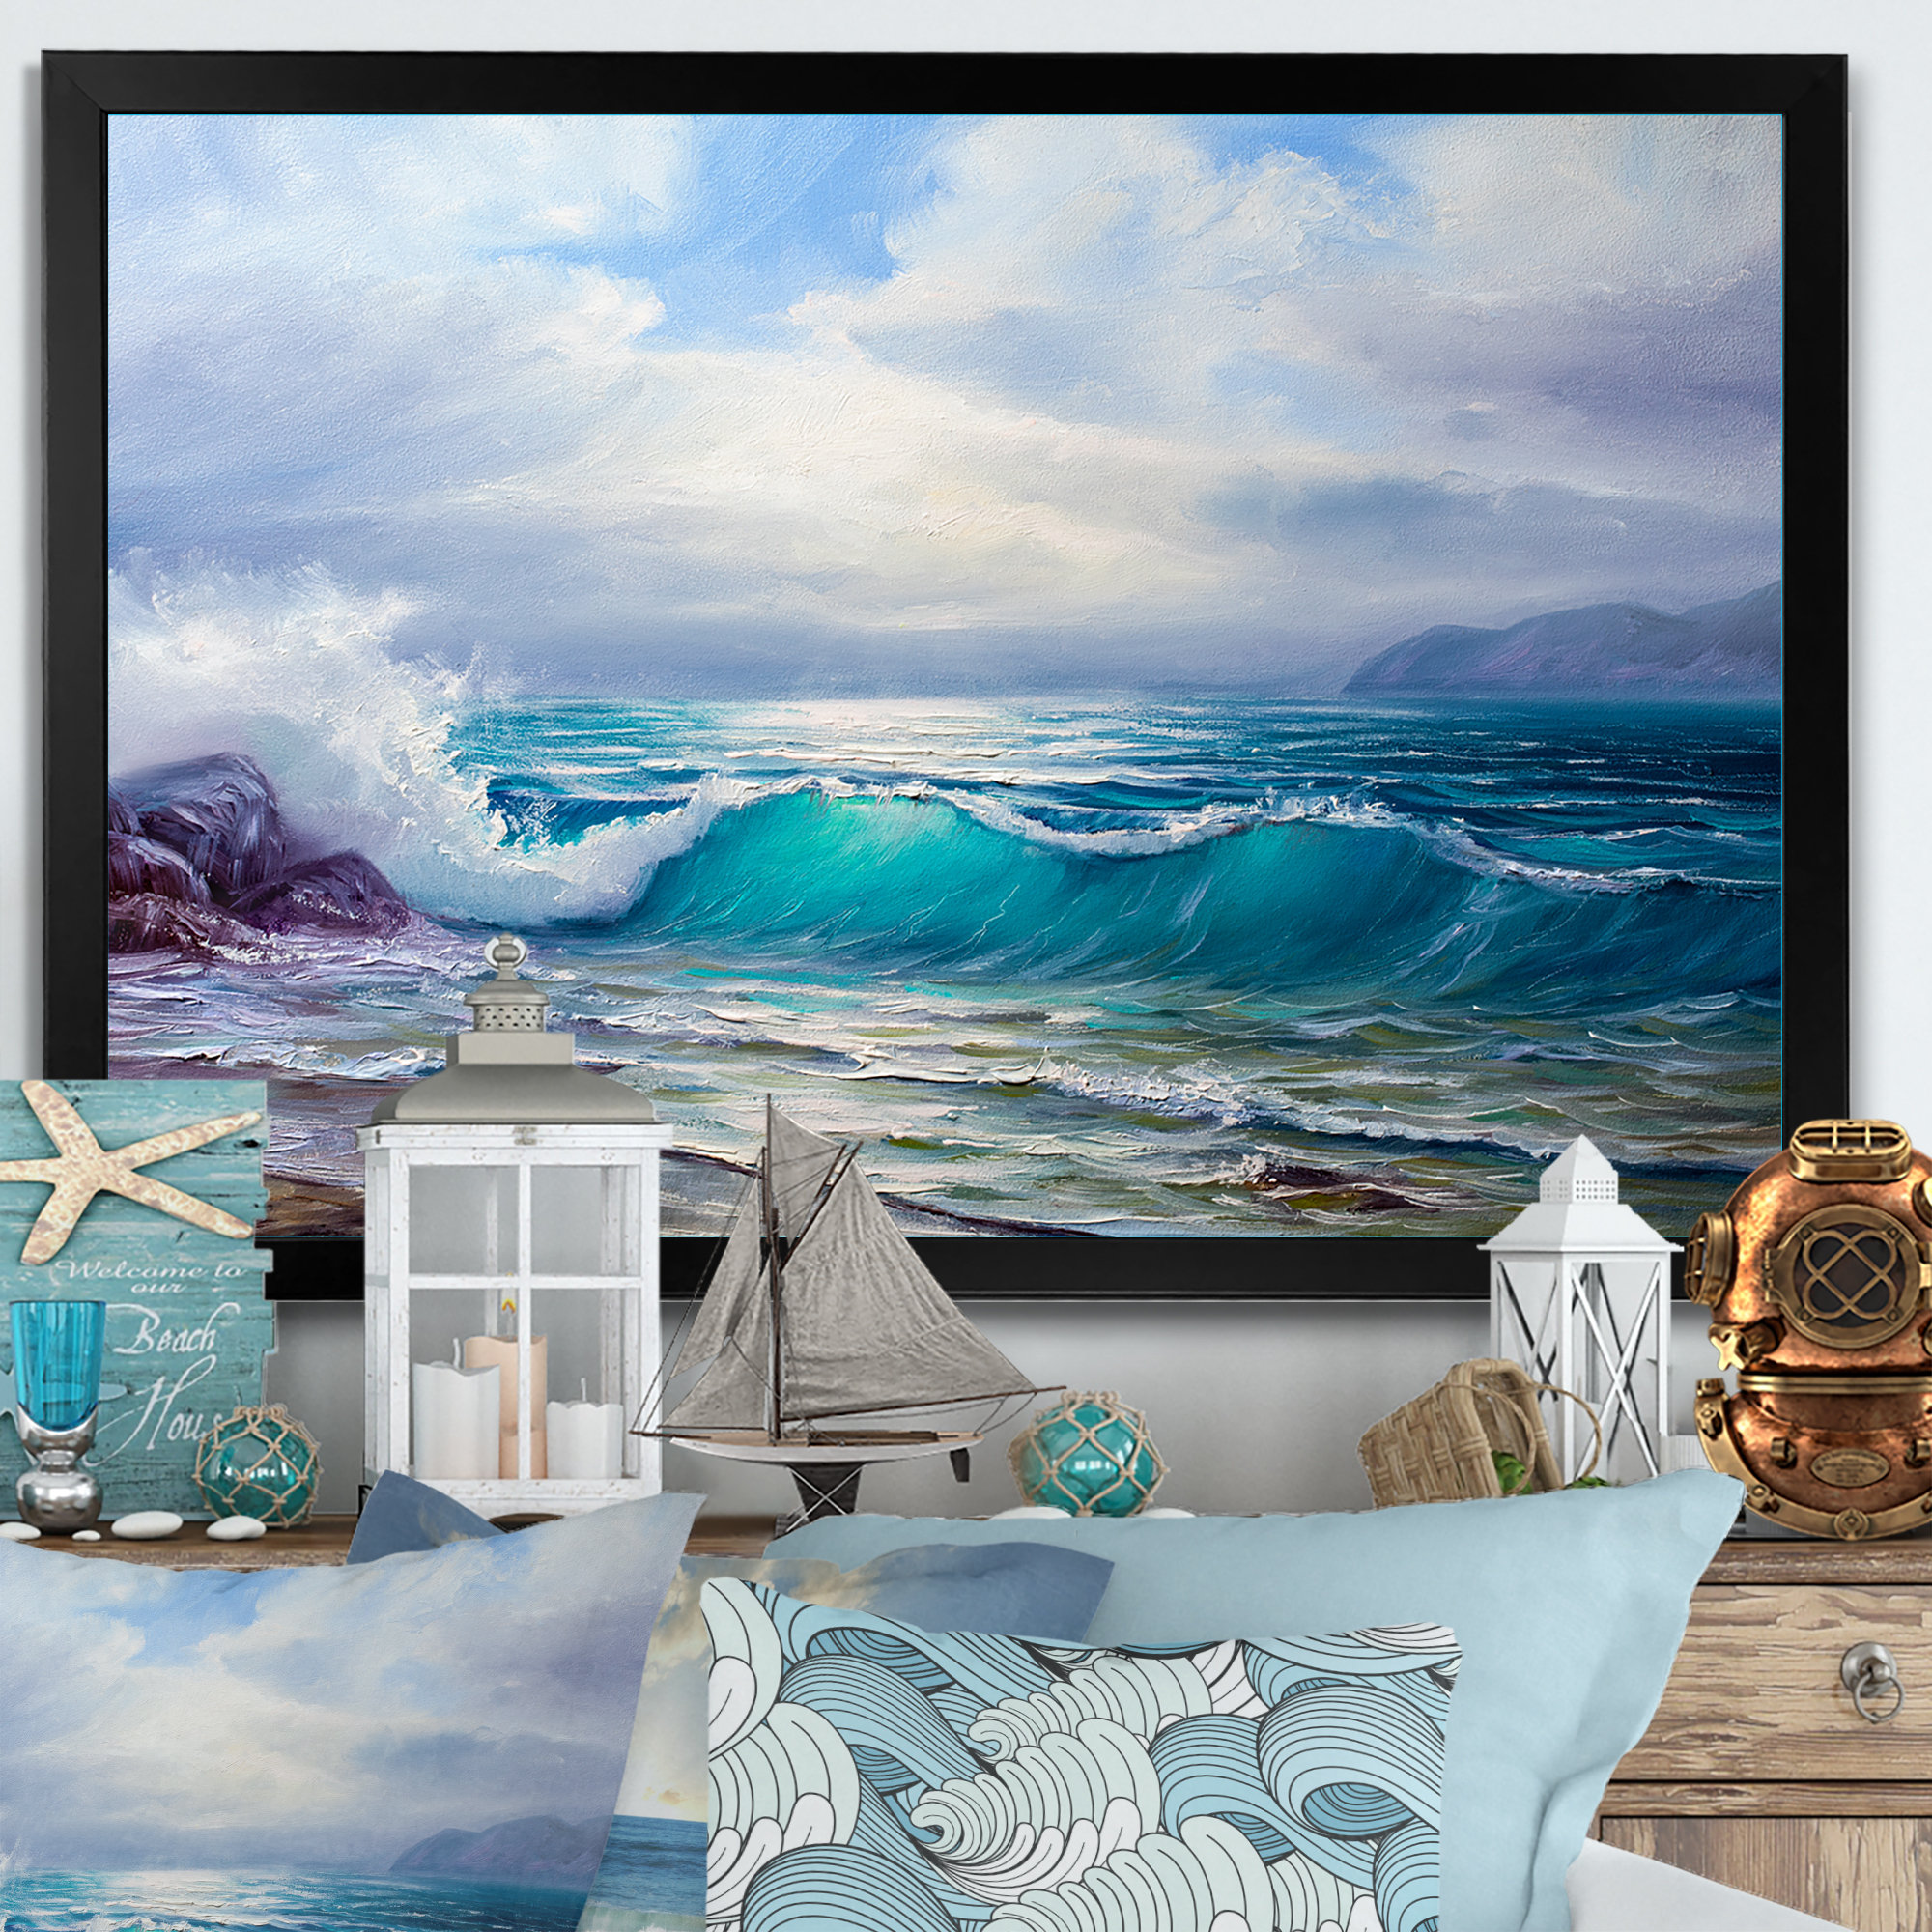 Seascape epoxy resin painting with real sand beach, foamy waves in